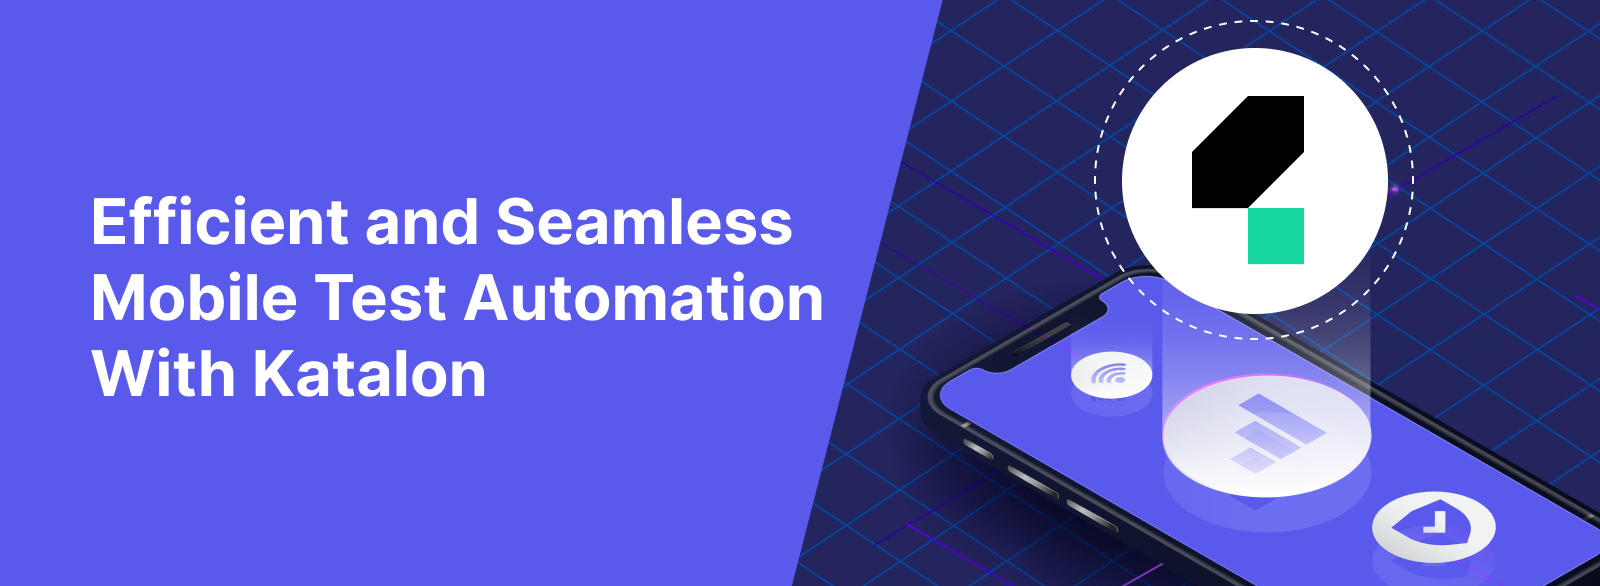 Efficient and seamless mobile test automation with Katalon